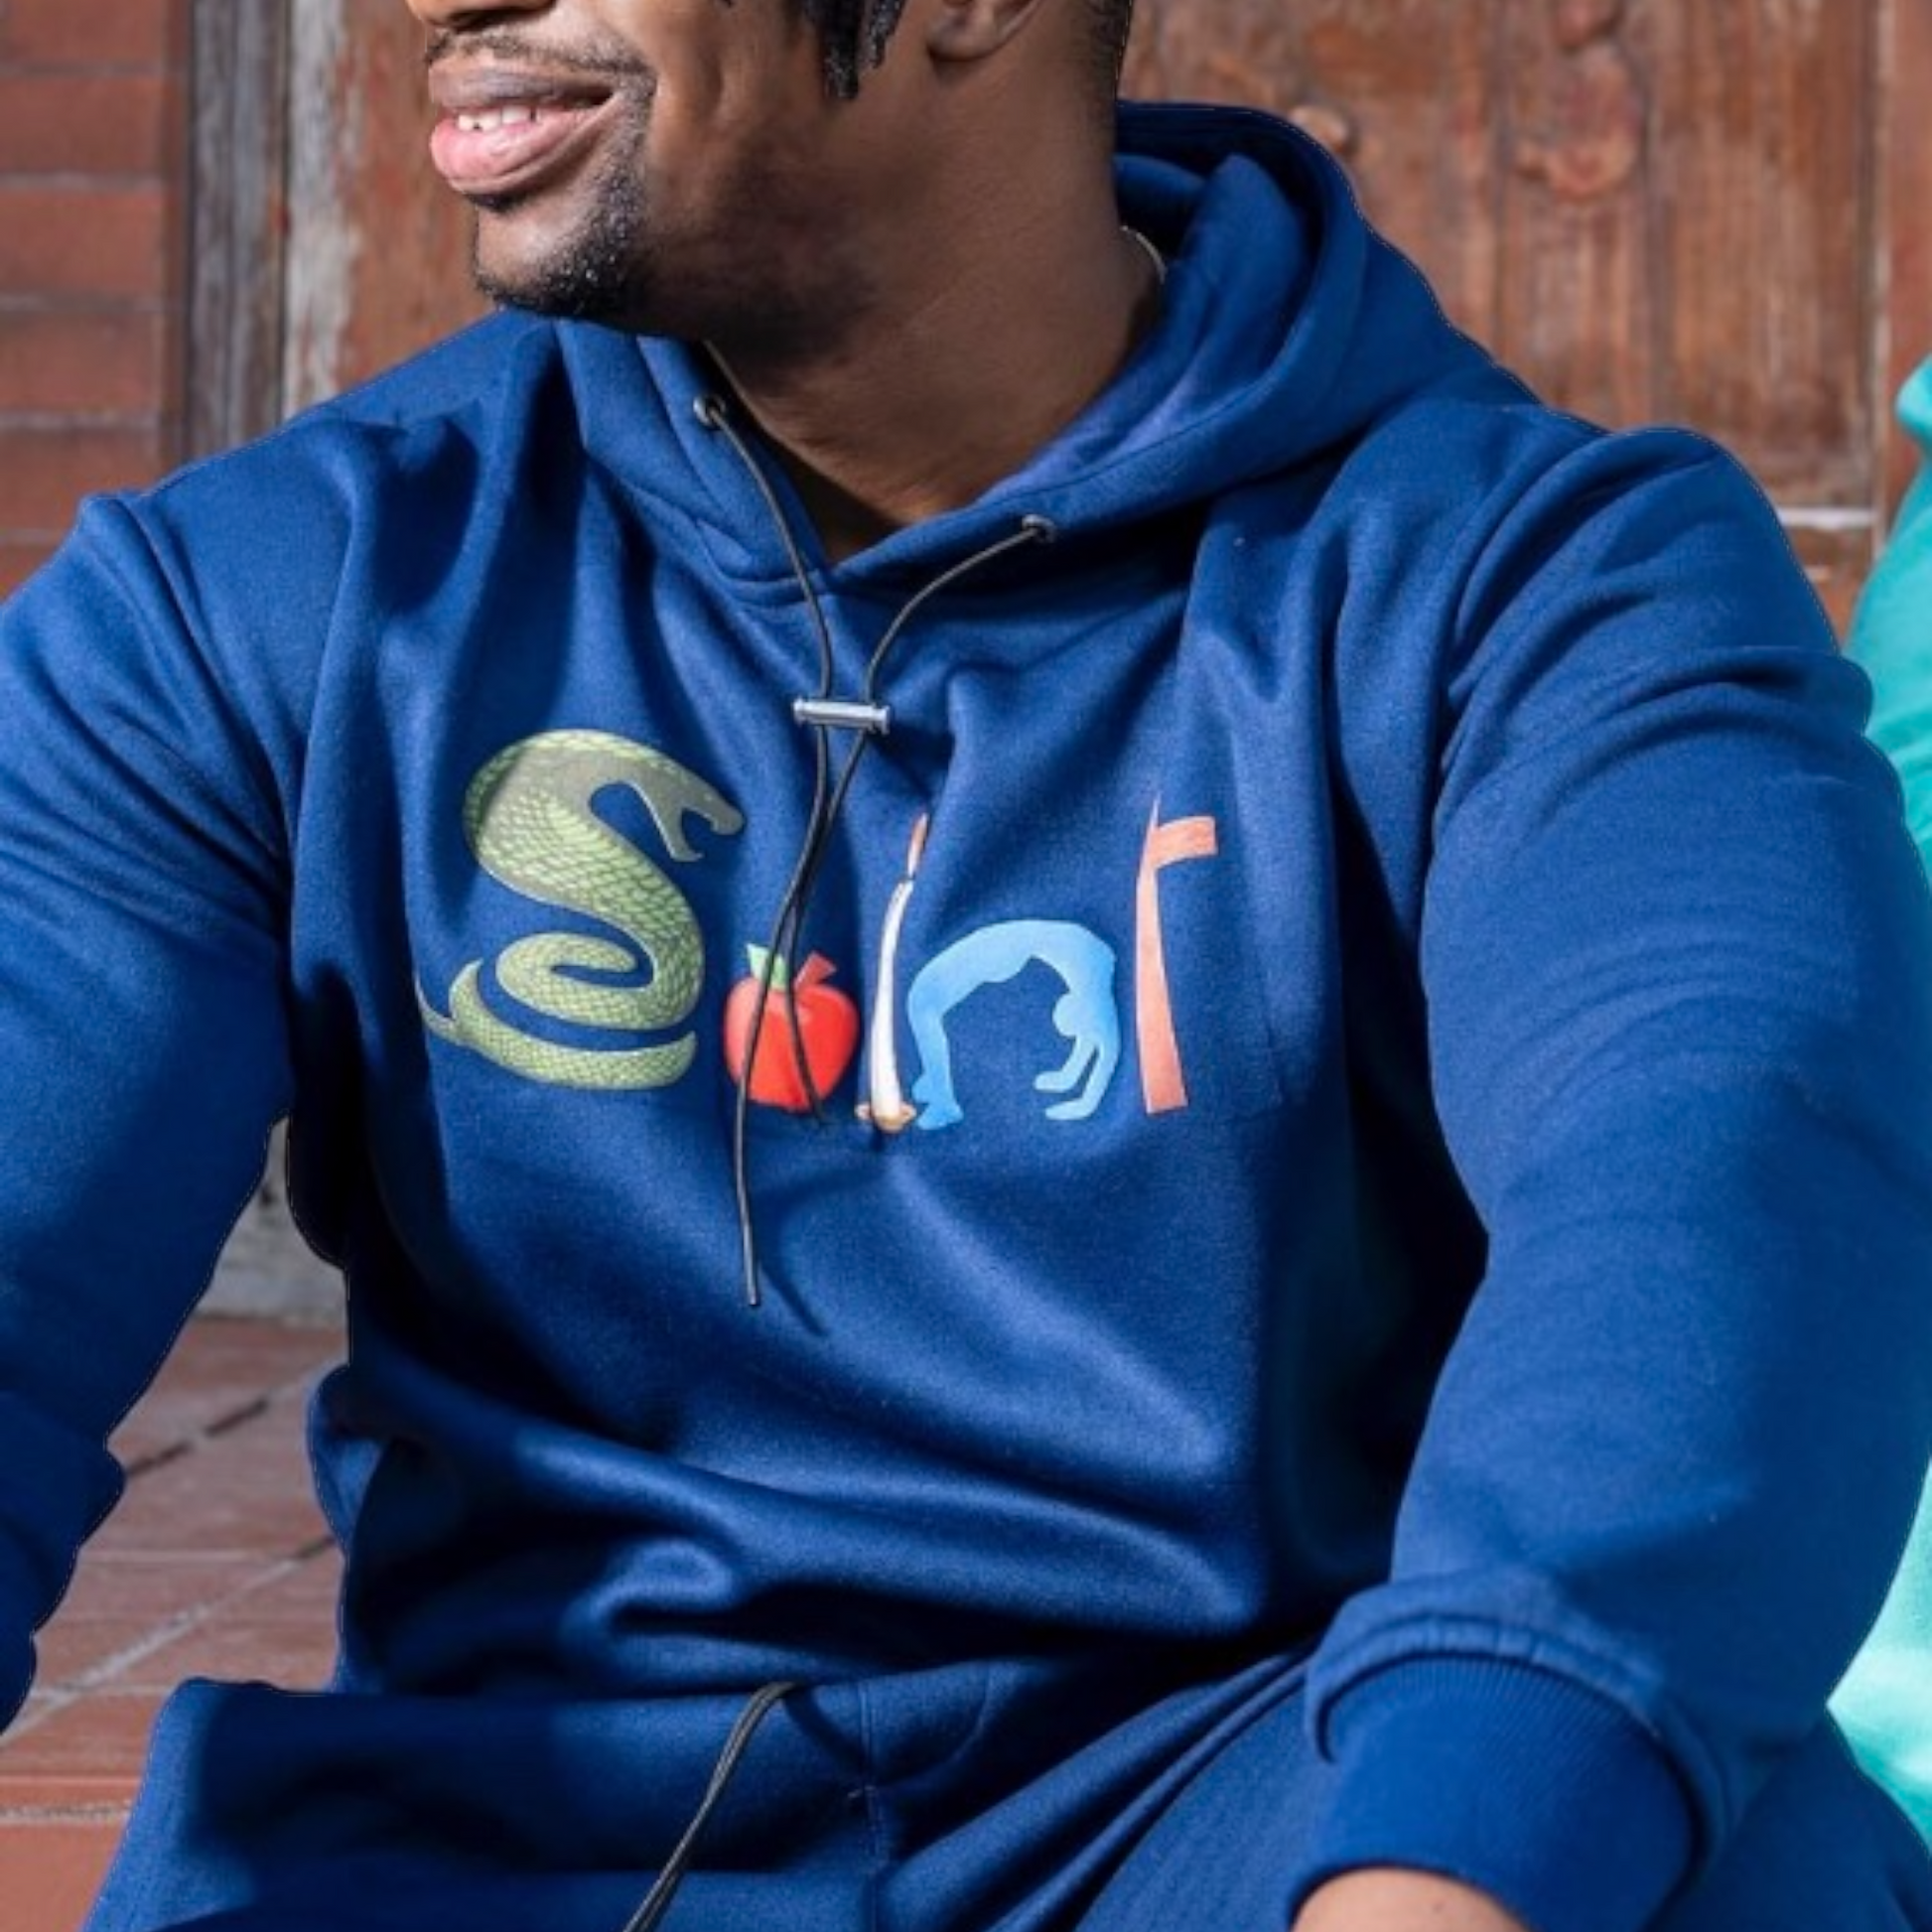 SAINT Matching Sets (Hoodies and Pants) - Navy Blue color **Limited Release - TheSinners2Saints